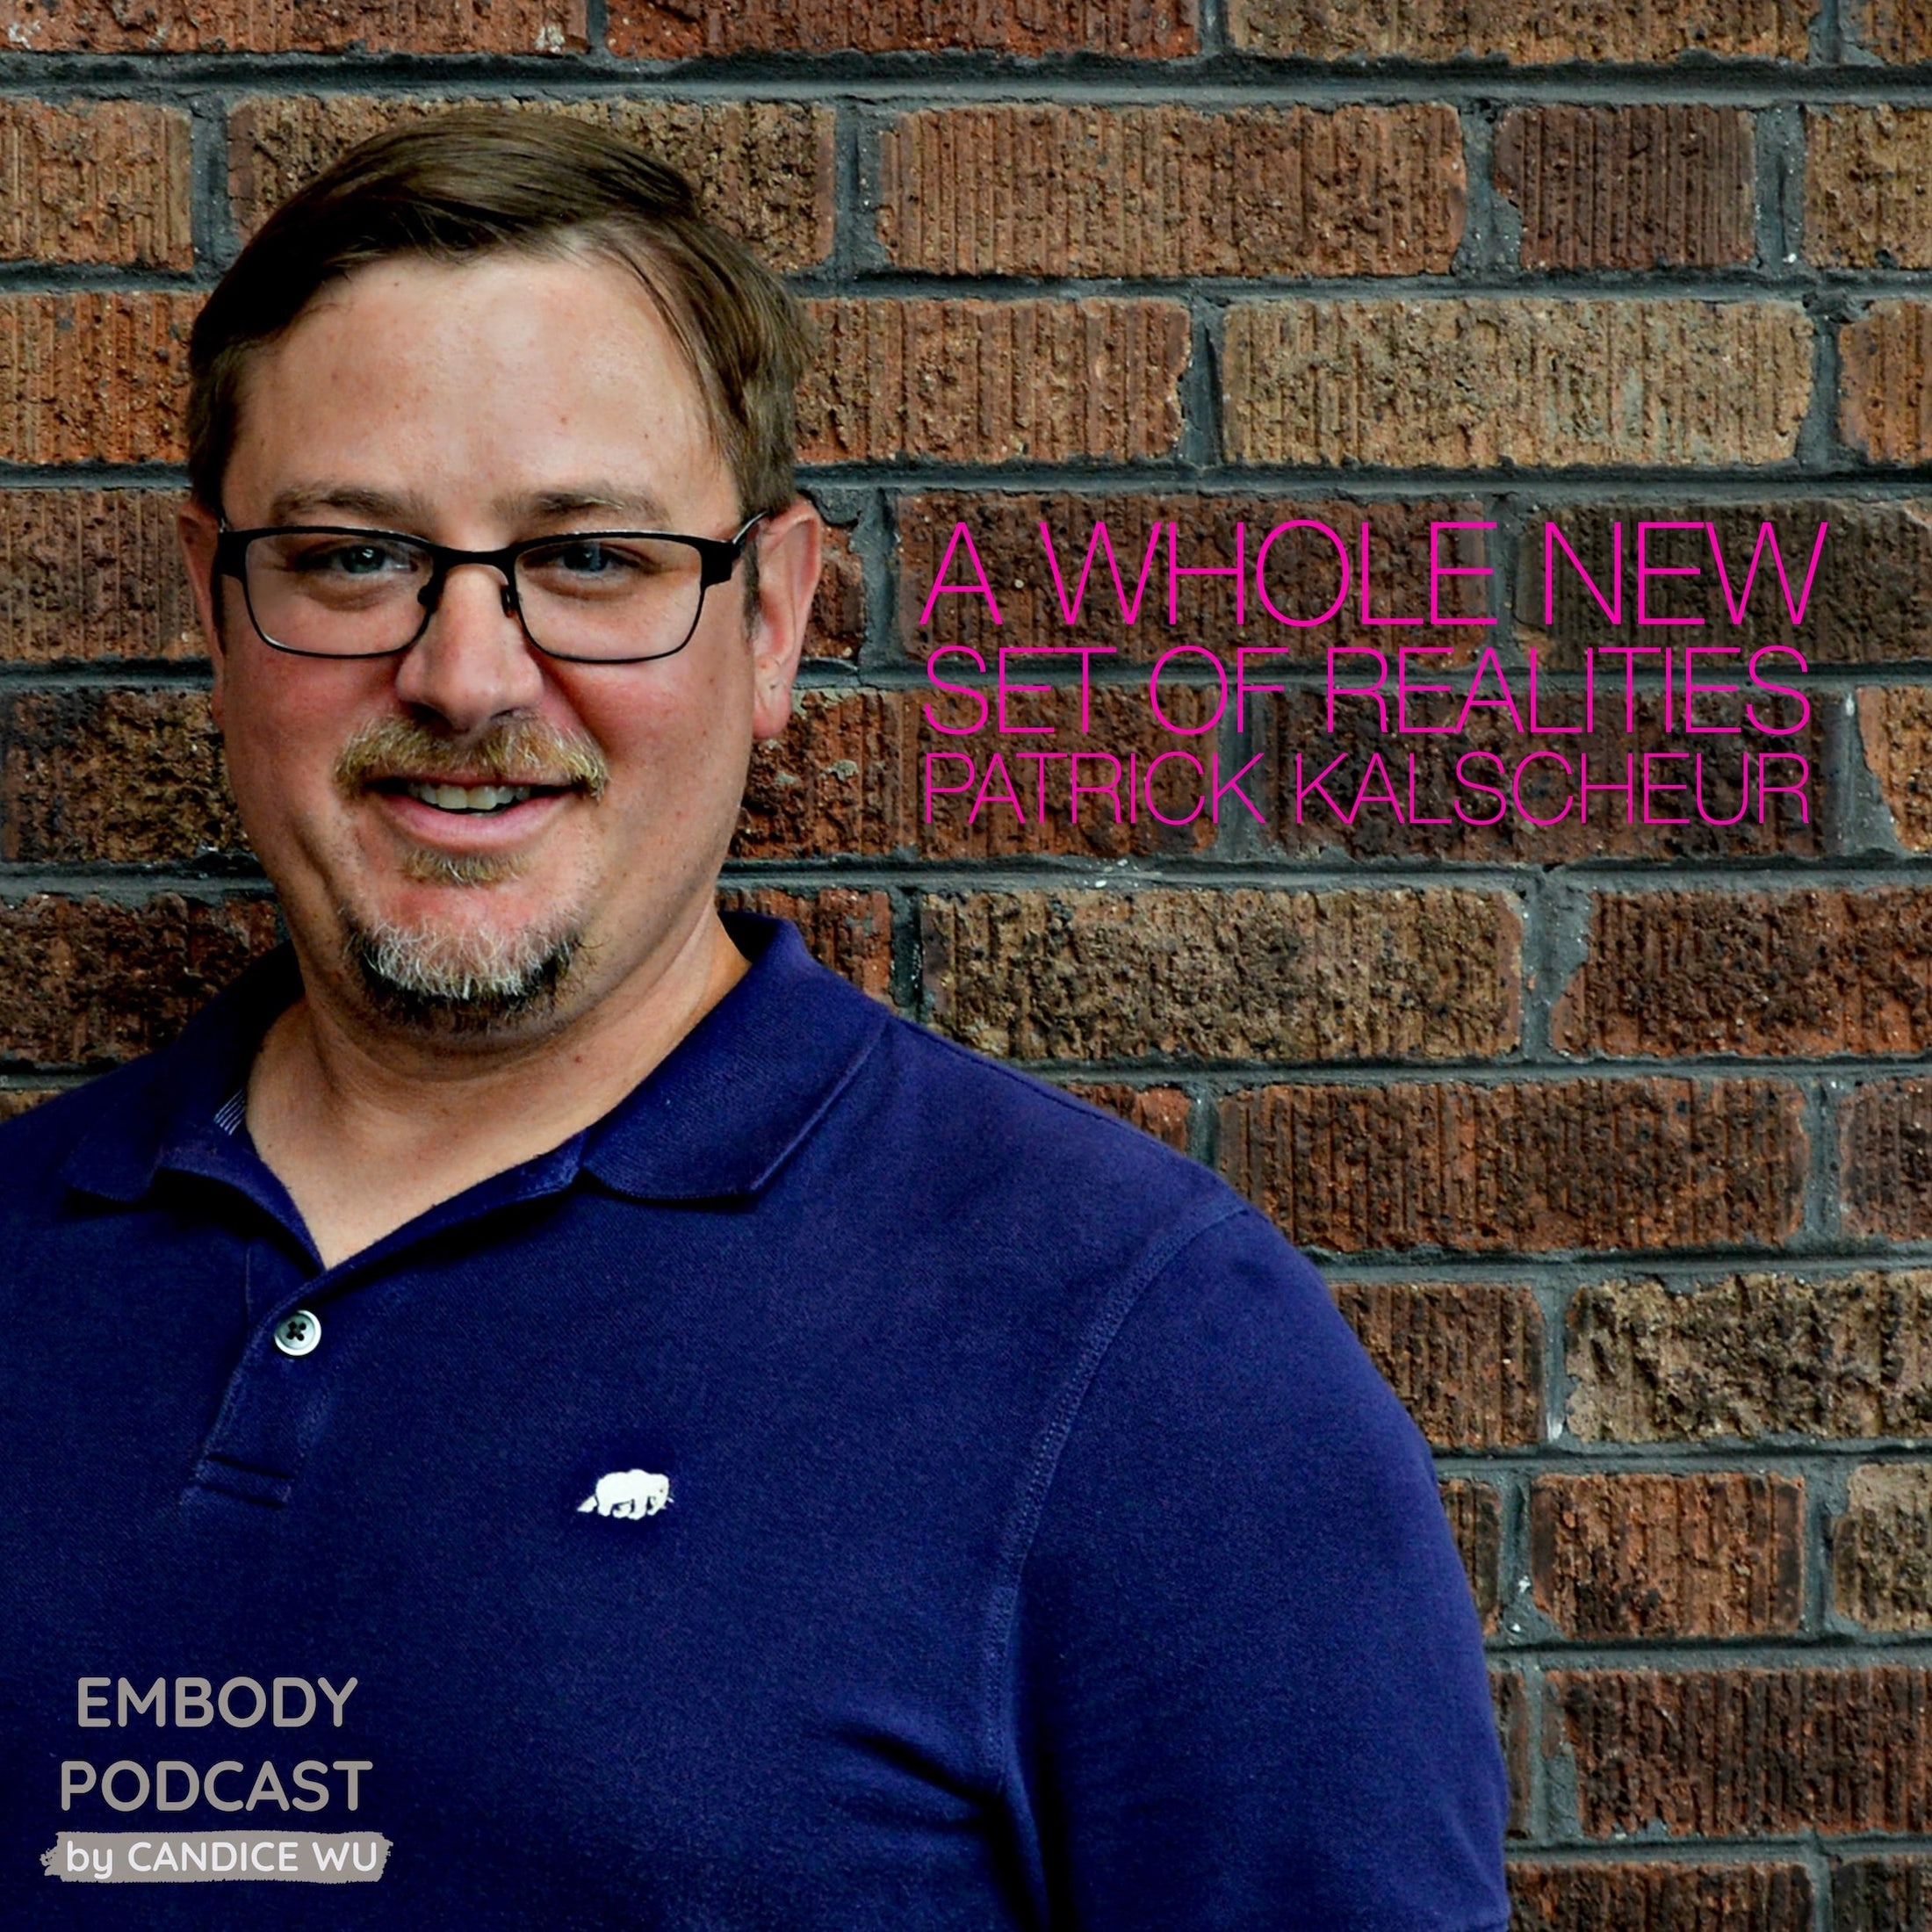 31: A Whole New Set of Realities: Patrick Kalscheur